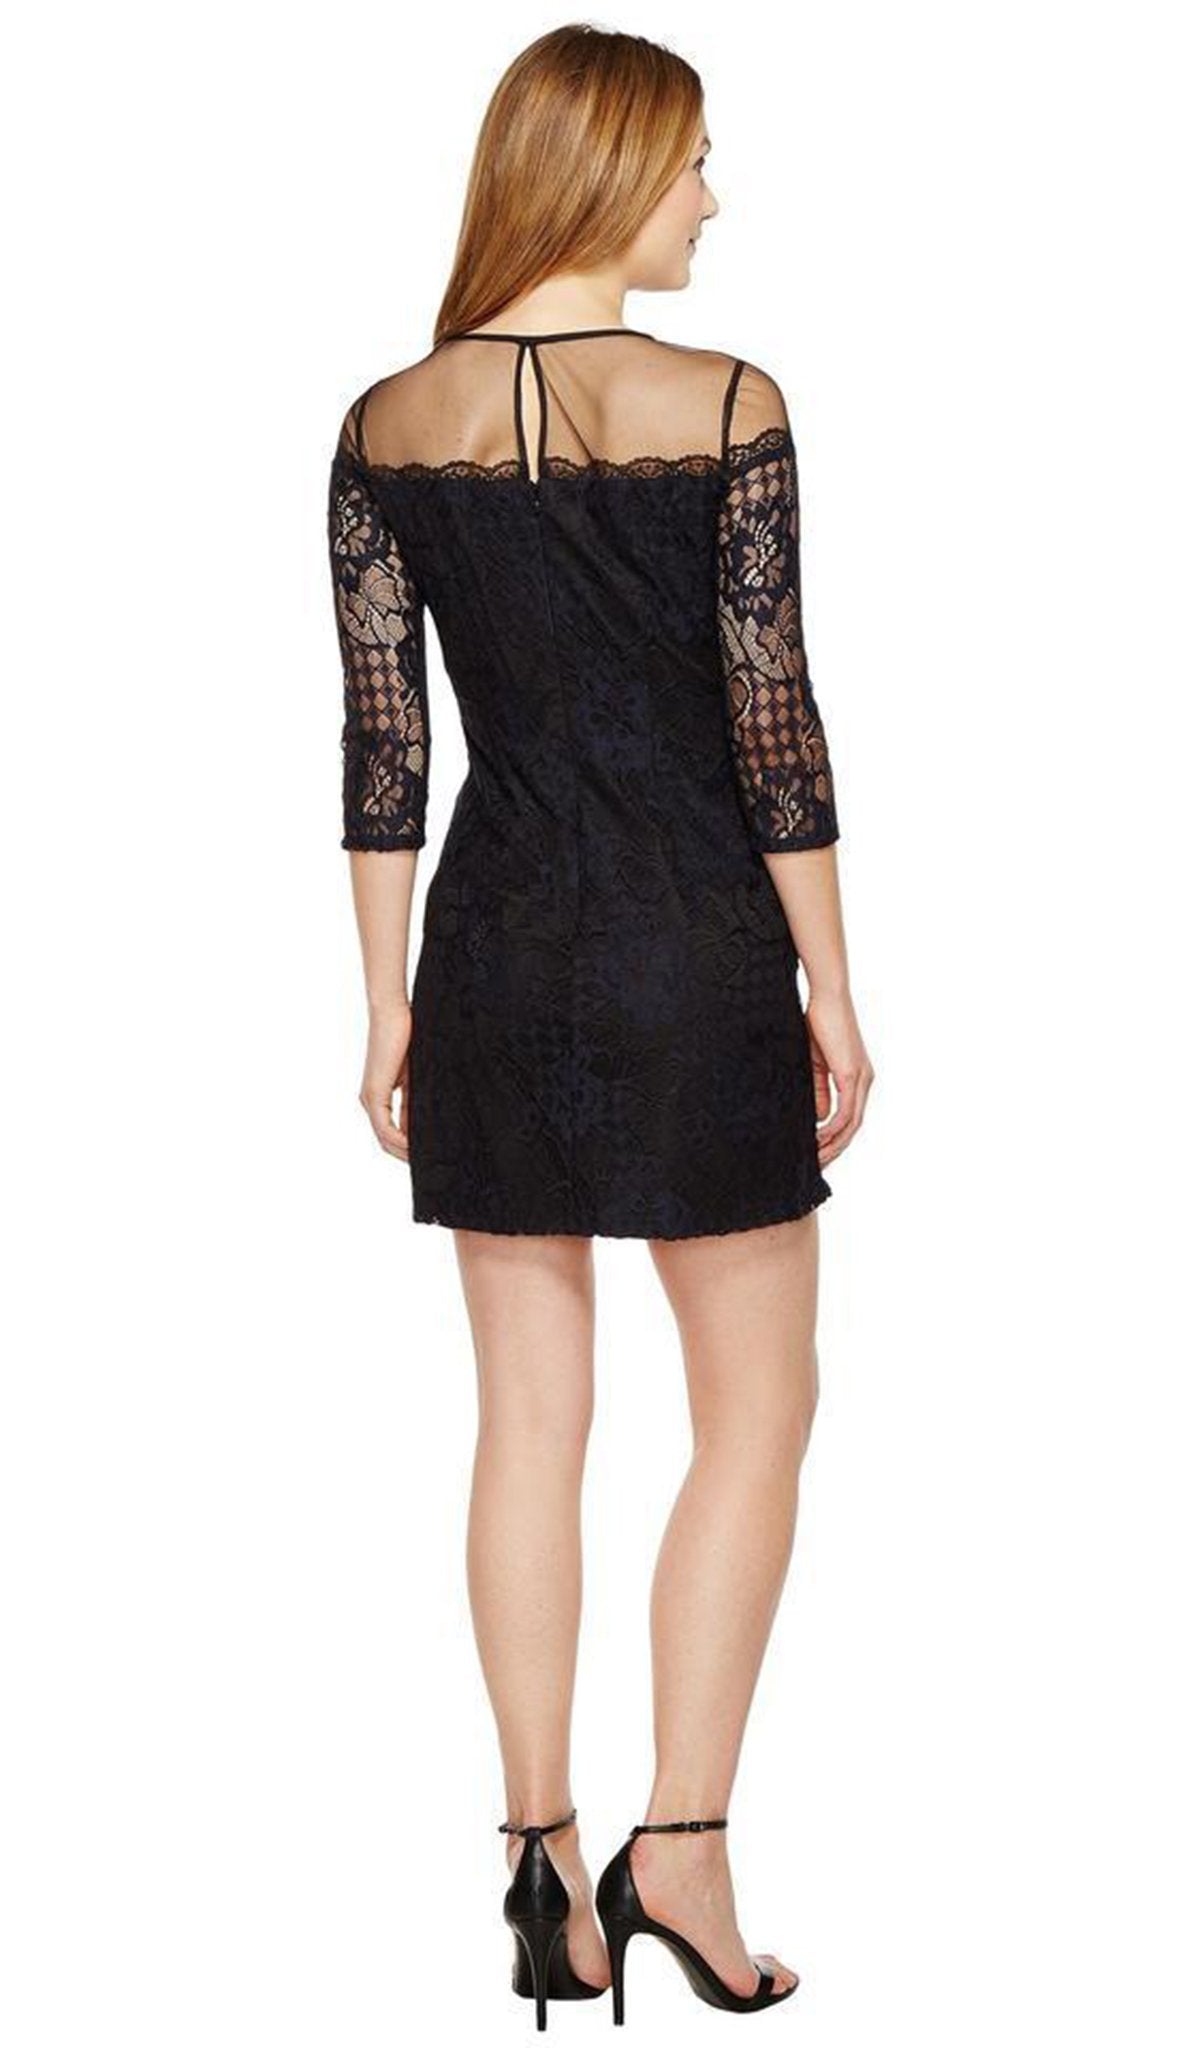 Adrianna Papell - AP1D100545 Lace Quarter Length Sleeve Sheath Dress In Black and Blue